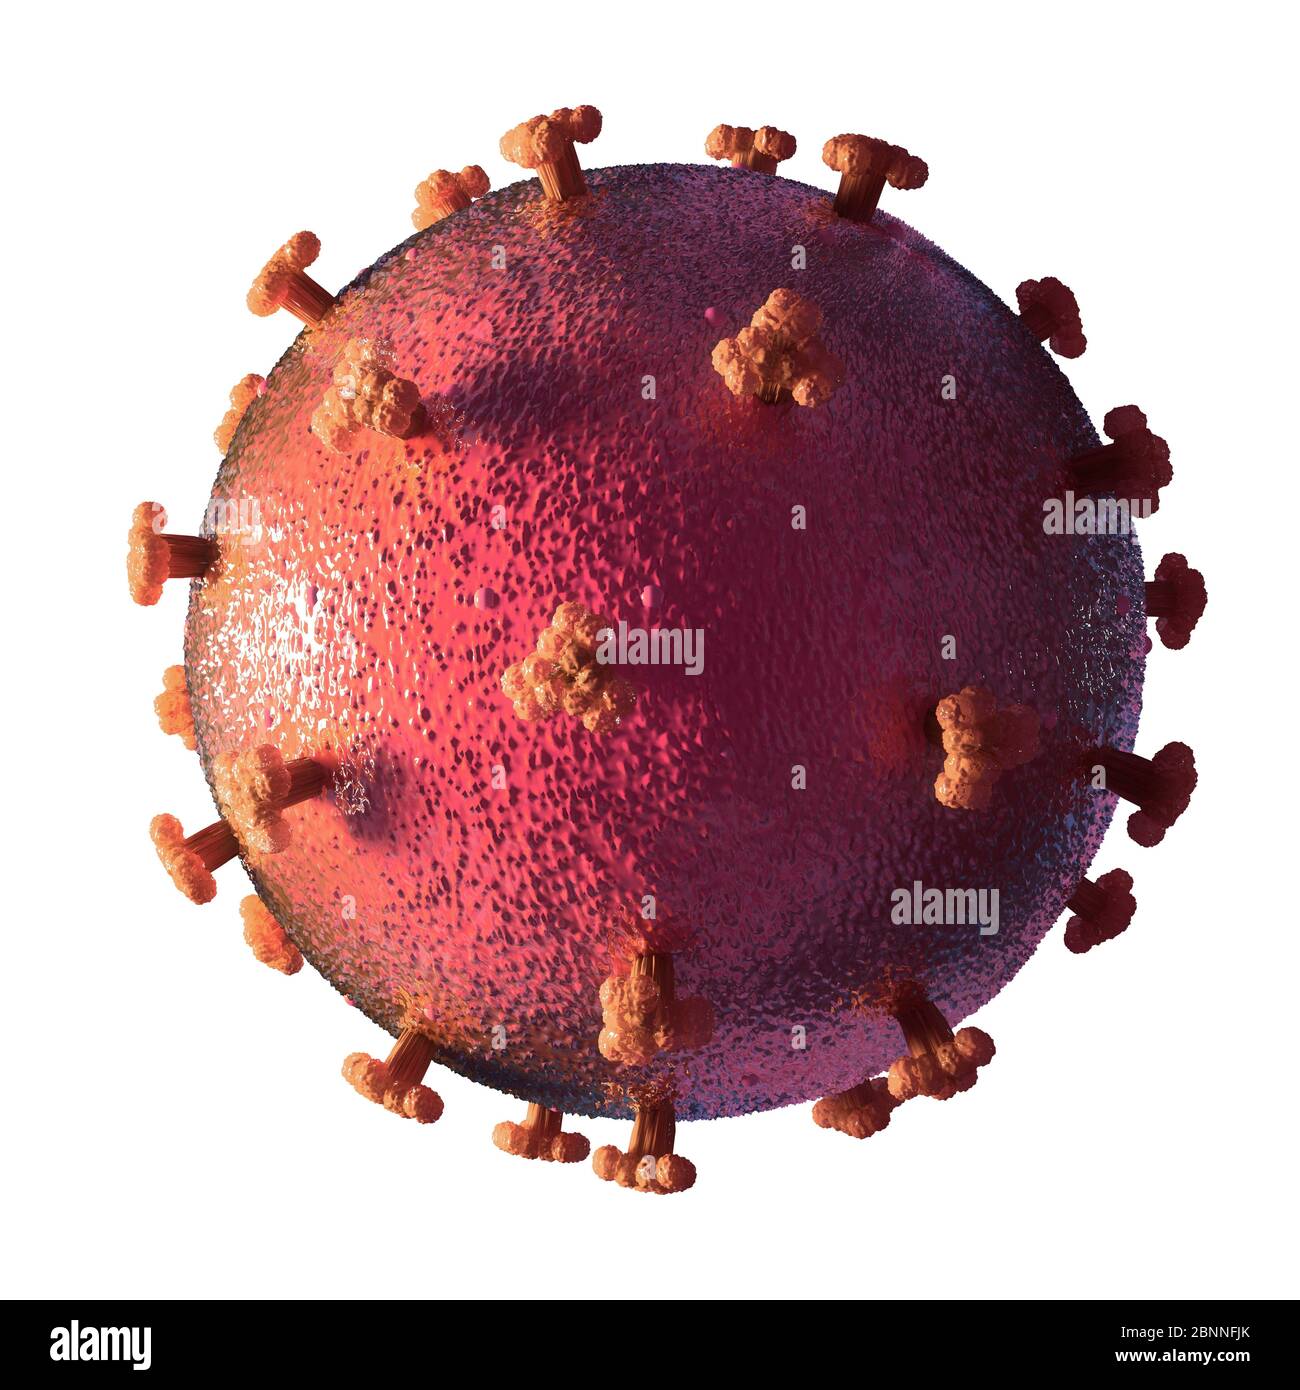 Illustration of a coronavirus, the cause of the new disease covid-19. This disease was first detected in Wuhan, China, in December 2019. It is contagious and has since spread rapidly around the world. The disease causes fever, cough and shortness of breath, and can lead to fatal pneumonia in some cases. SARS-CoV-2 is an RNA virus that uses protein spikes to gain entry to host cells. Stock Photo